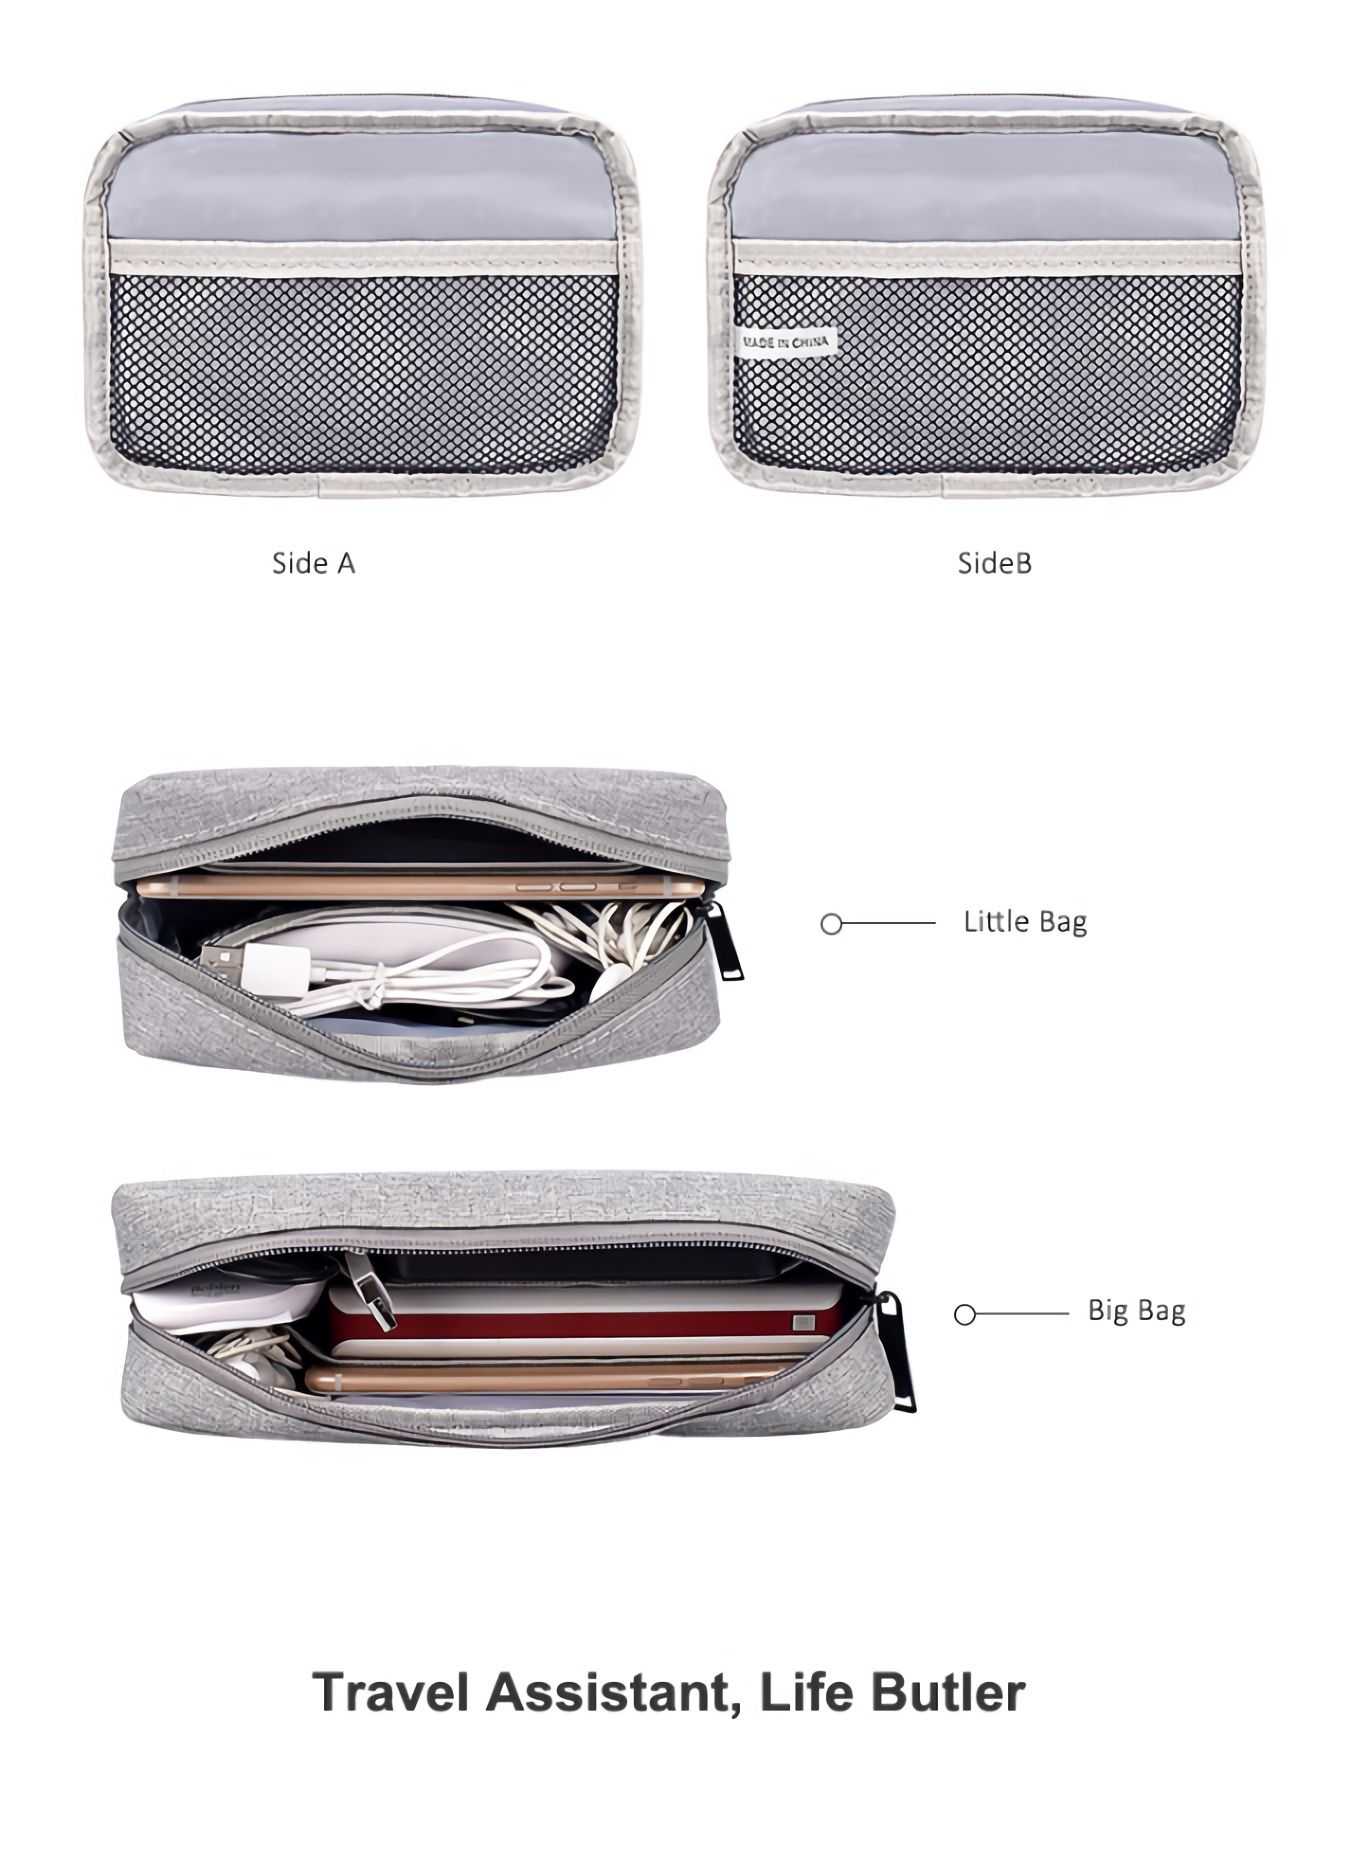 Laptop-Power-Adapter-Accessories-Storage-Bag-Travel-Cable-Organizer-Bag-1657679